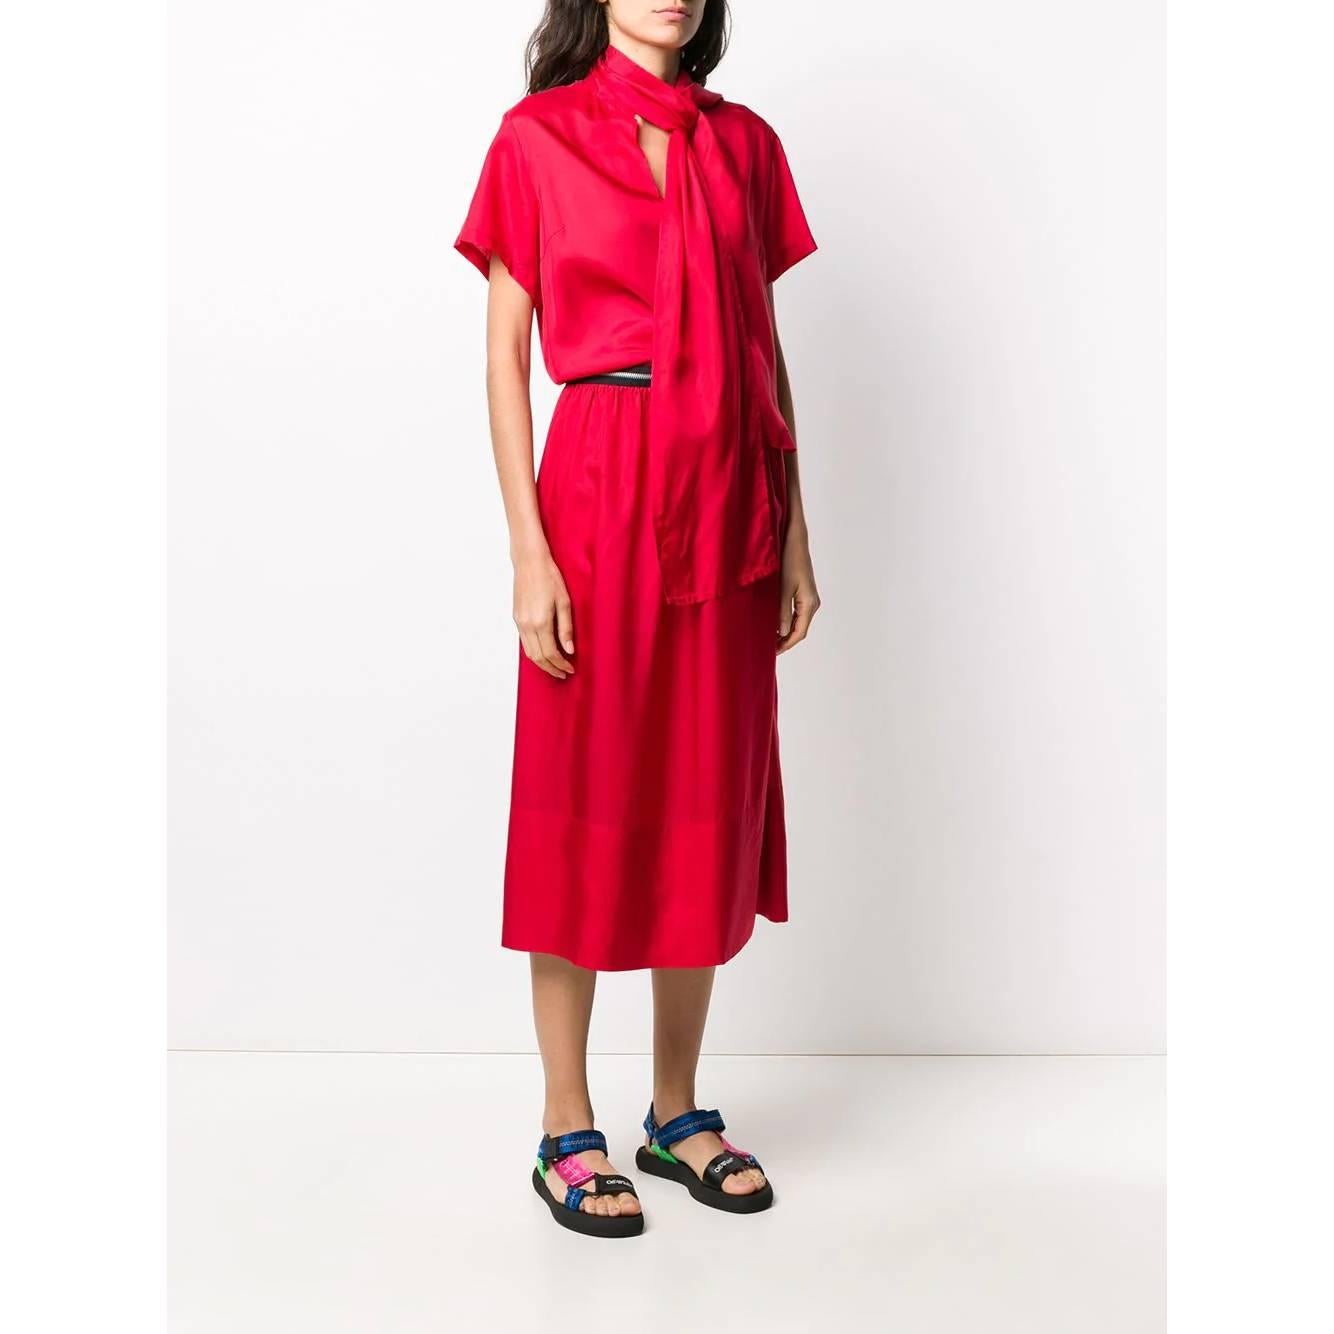 Comme Des Garçons red cupro dress. V-neck with Lavallière collar, zip at the waist to remove the skirt. Short sleeves, soft fit.

Years: 90s

Made in Japan

Size: M

Flat measurements

Lenght: 133 cm
Bust: 50 cm 
Shoulders: 39 cm
Sleeves: 19 cm